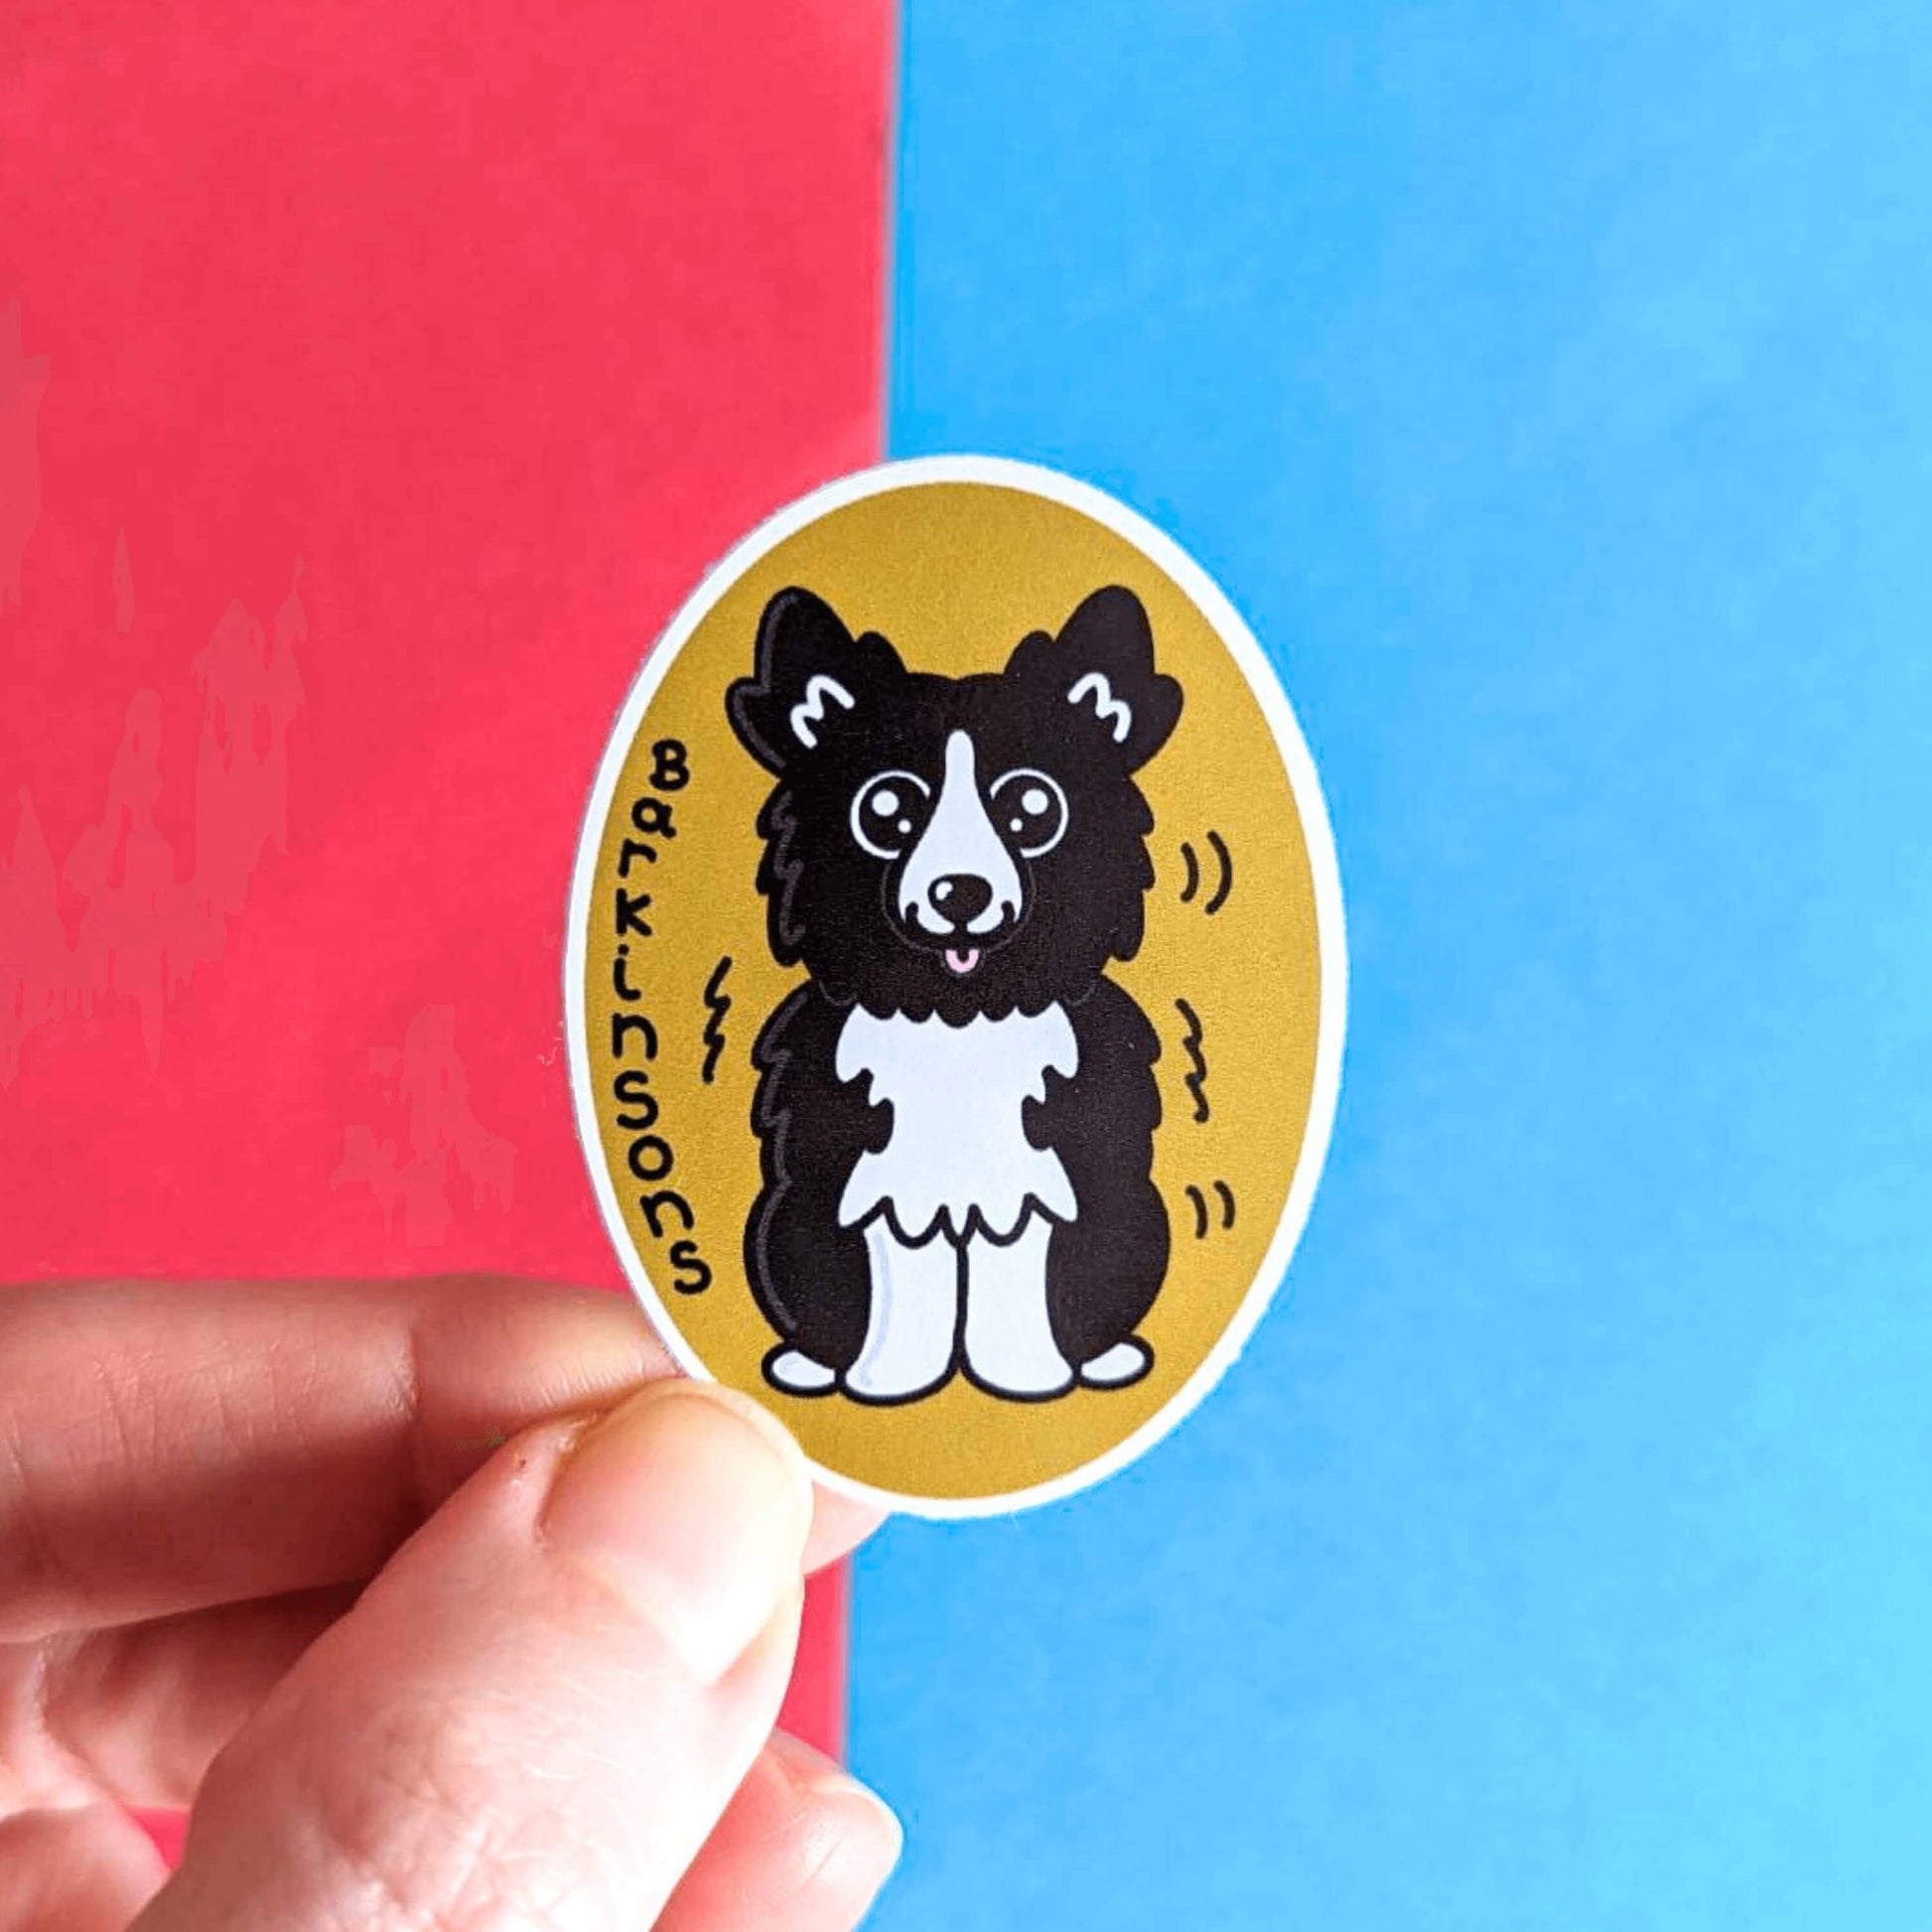 Barkinsons Disease Sticker - Parkinsons being held over a red and blue background. The sticker is yellow and oval shaped with a black and white fluffy dog in the middle sat down with big sparkly eyes and pink tongue hanging out. There are black squiggles around the dog and 'Barkinsons' written in black vertical letters. The design is to raise awareness for parkinson's disease.